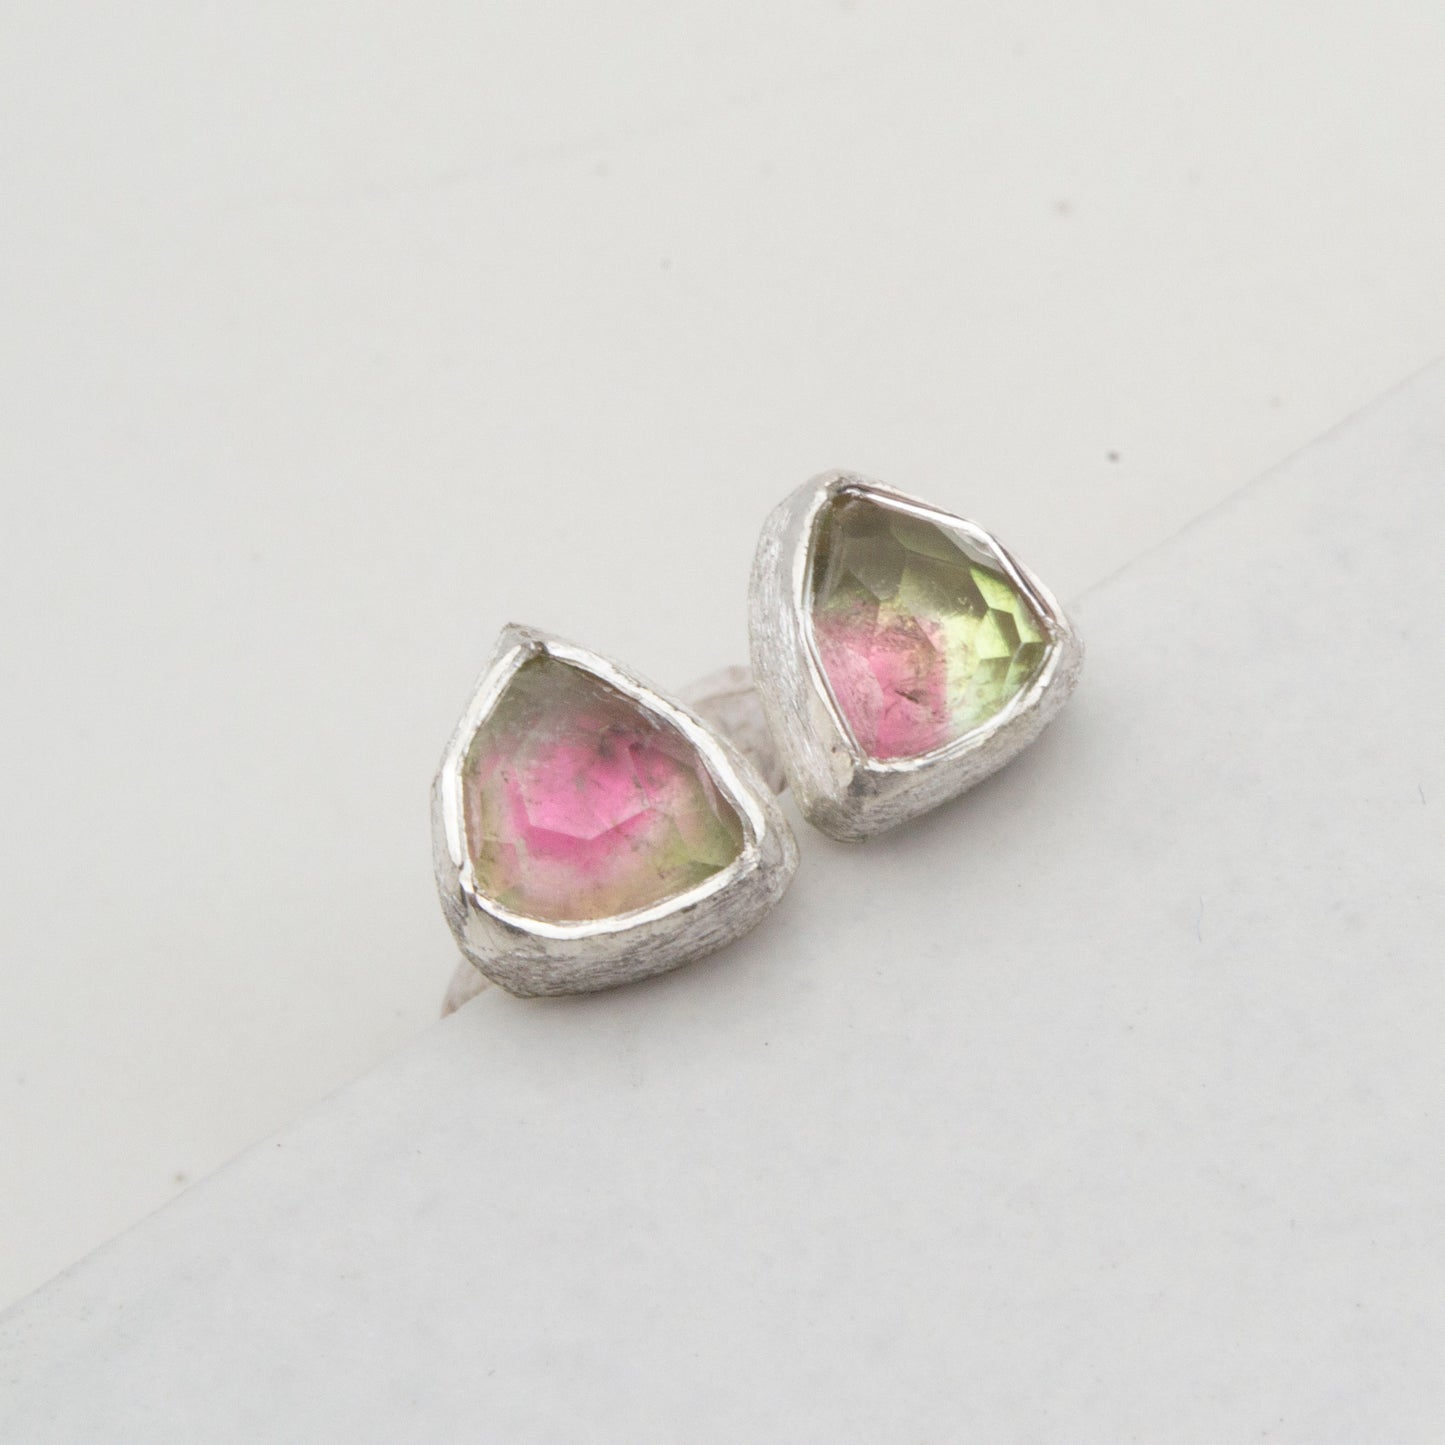 Pink and green tourmaline stud earrings